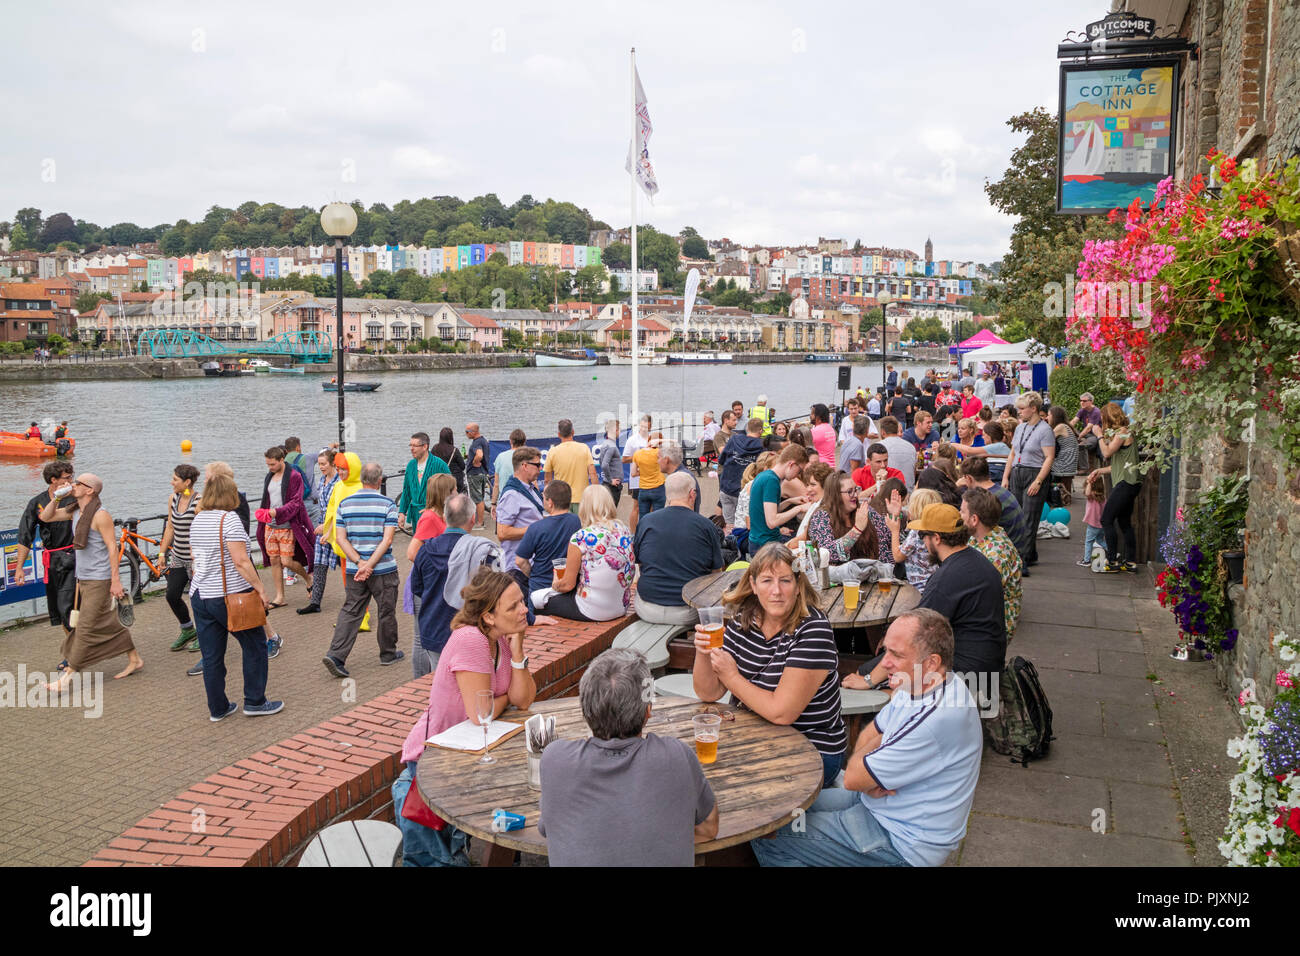 People relaxing at the Cottage Inn on the Harbourside, Bristol Harbour in city of Bristol, England, UK Stock Photo